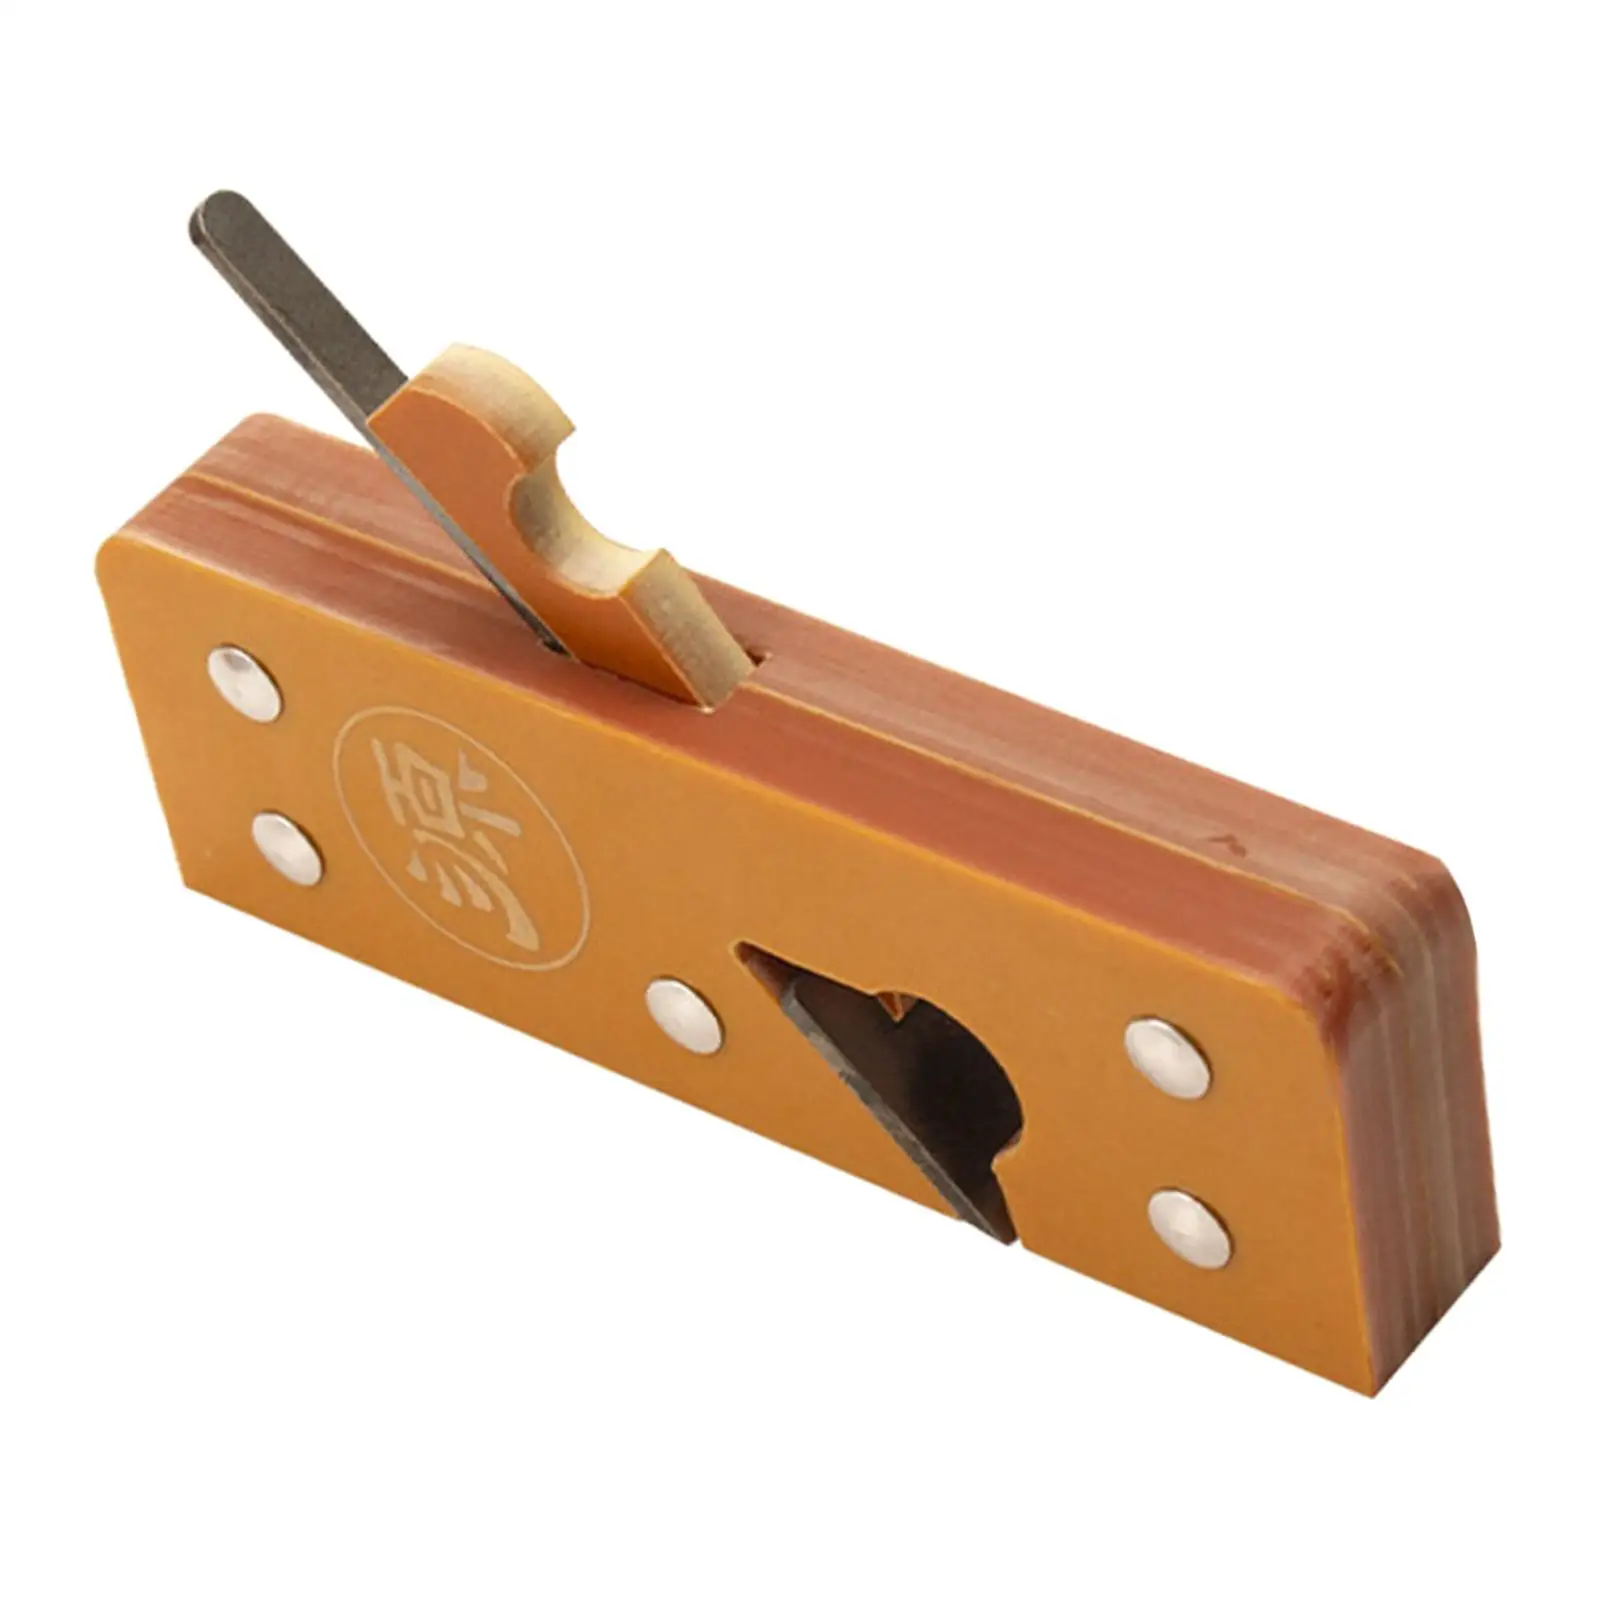 160mm Hand Planer Woodworking Planes Smoothing Plane Portable Hand Plane for Carpenter Polishing Edges